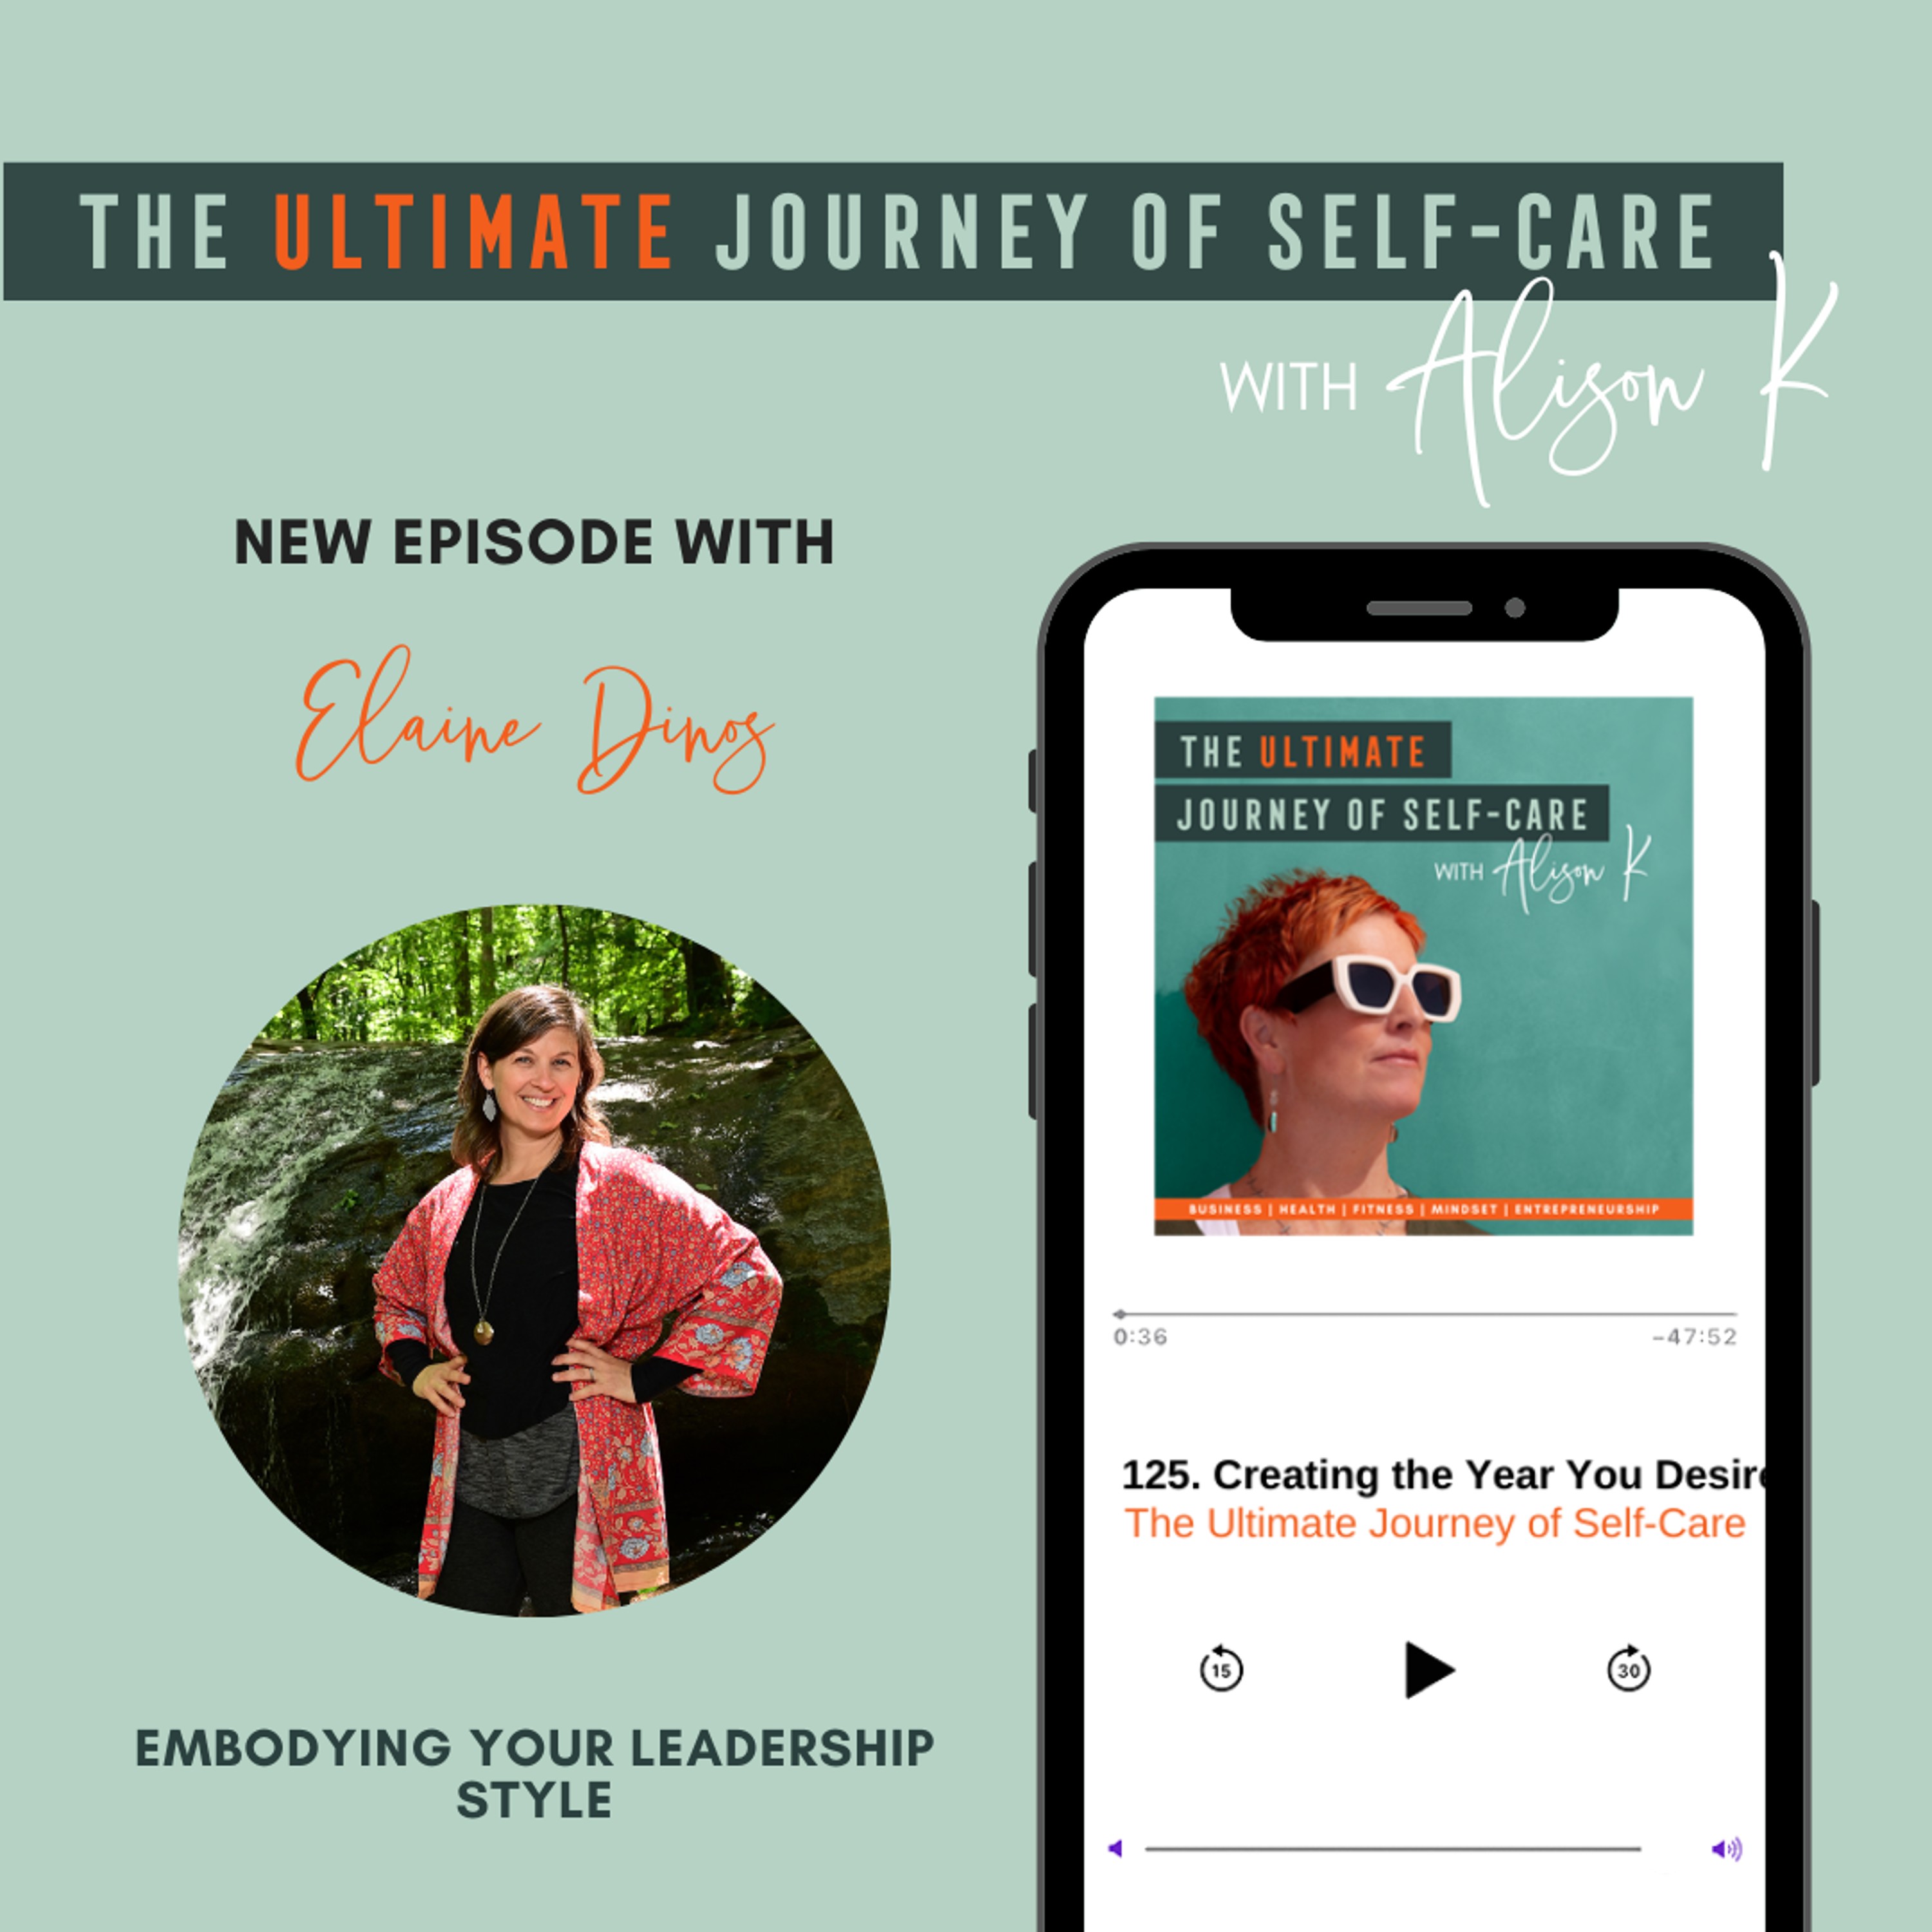 Embodying Your Leadership Style with Elaine Dinos